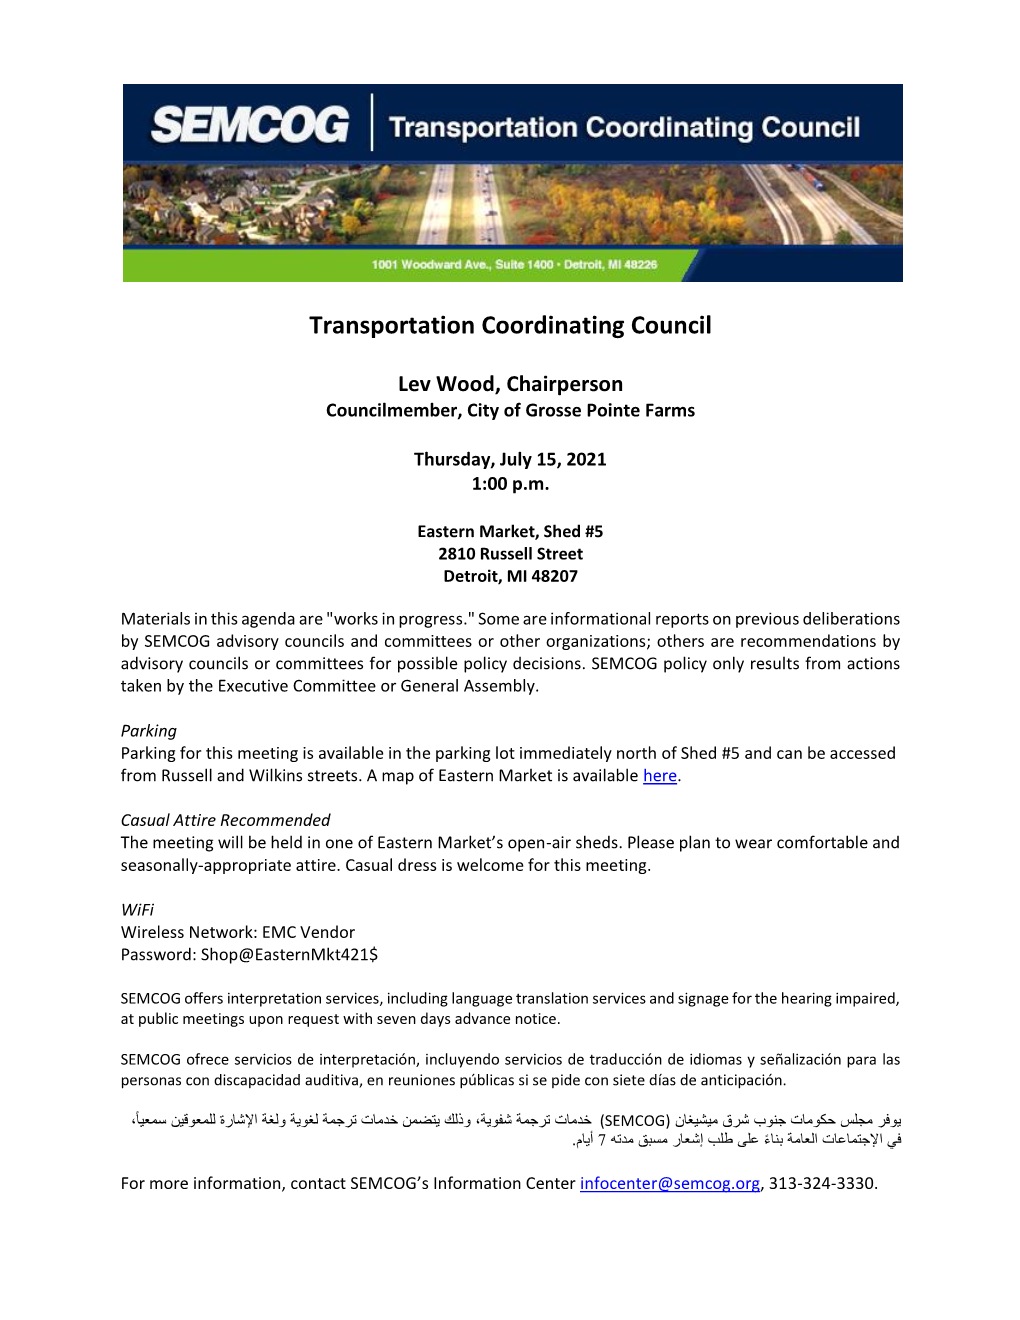 Transportation Coordinating Council Agenda for July 15, 2021